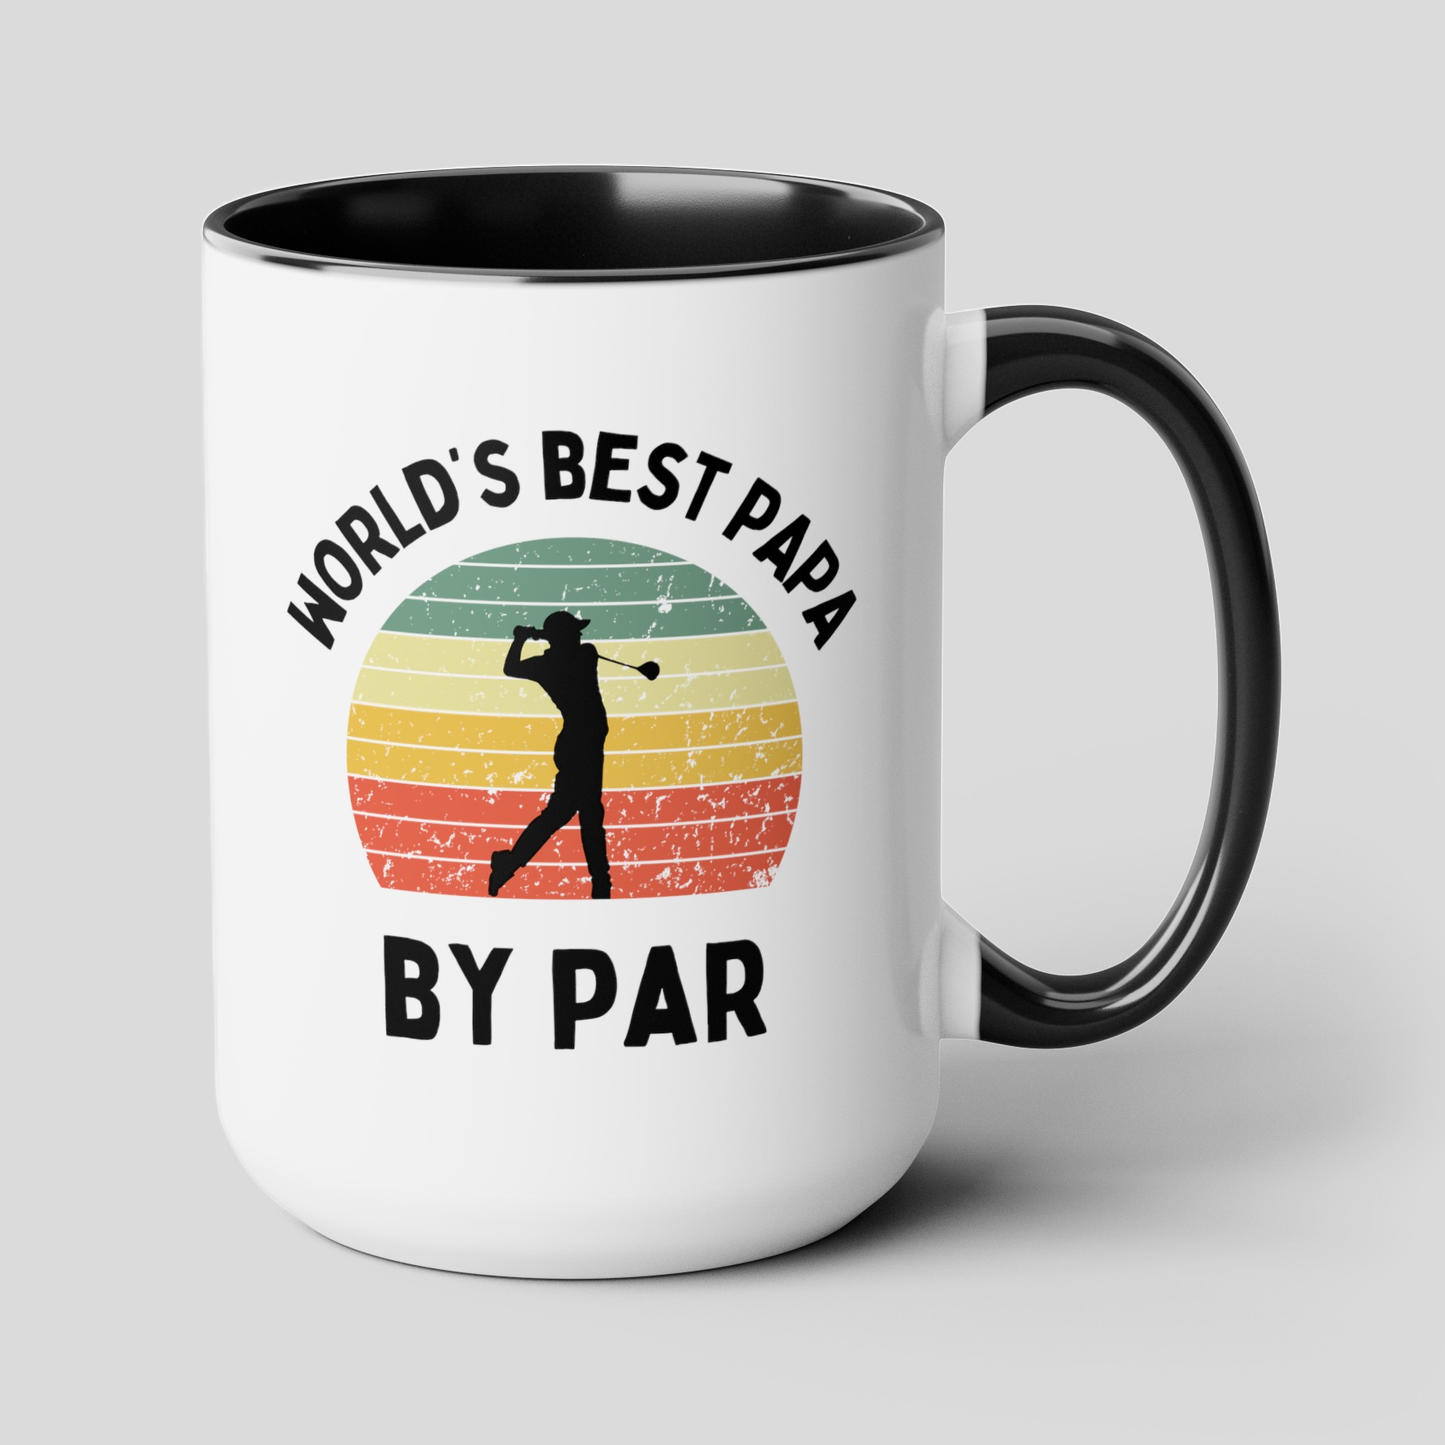 World's Best Papa By Par 15oz white with with black accent large big funny coffee mug tea cup gift for him golfer vintage sunset golf men him grandad grandpa pops father's day waveywares wavey wares wavywares wavy wares cover